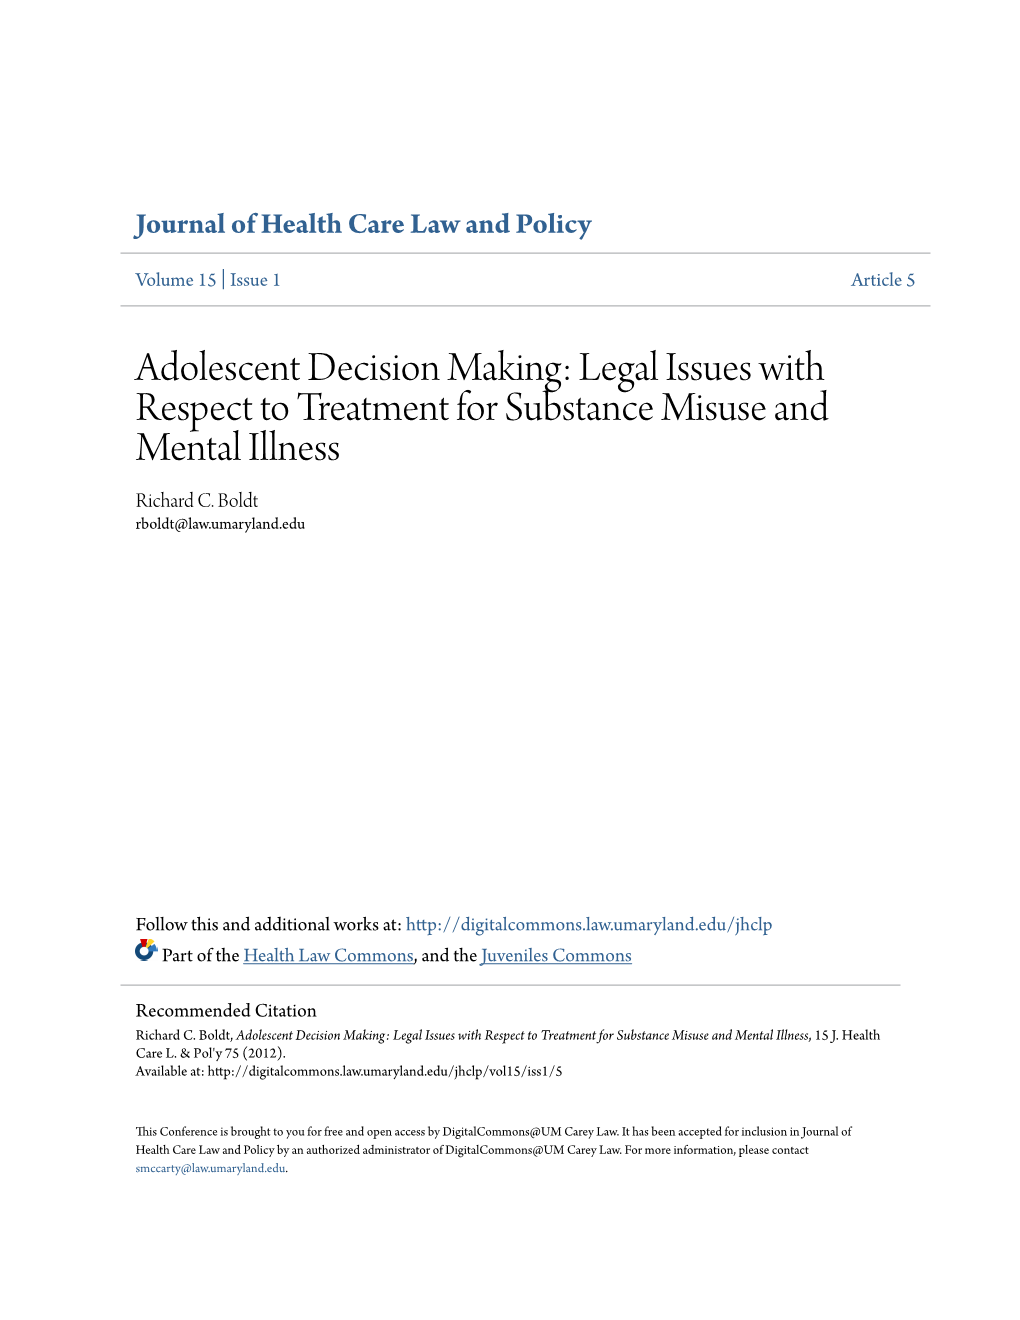 Adolescent Decision Making: Legal Issues with Respect to Treatment for Substance Misuse and Mental Illness Richard C